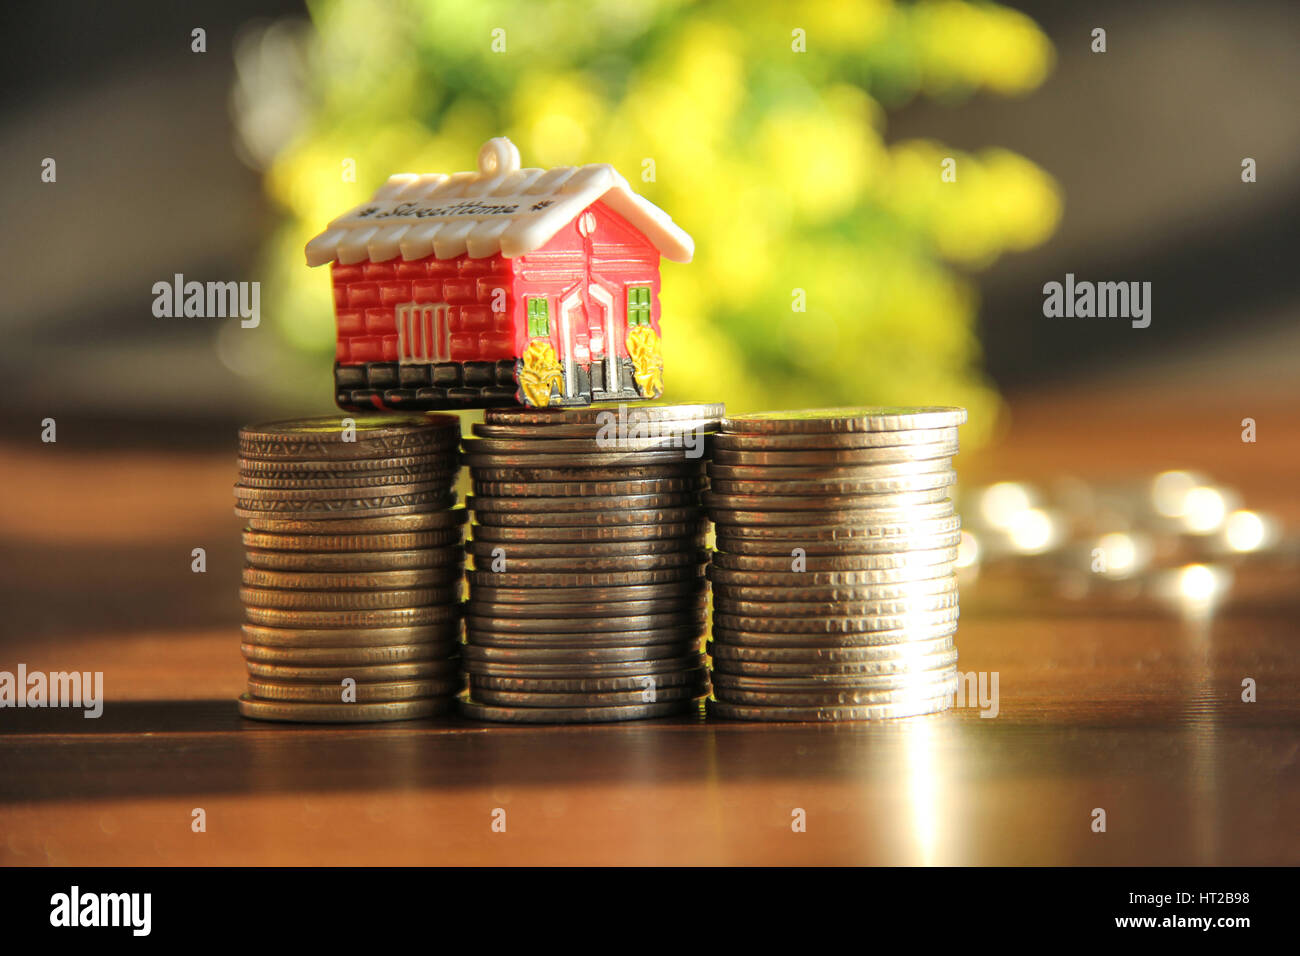 Saving money to buy house or home. Piggy bank with stack of coins Stock Photo